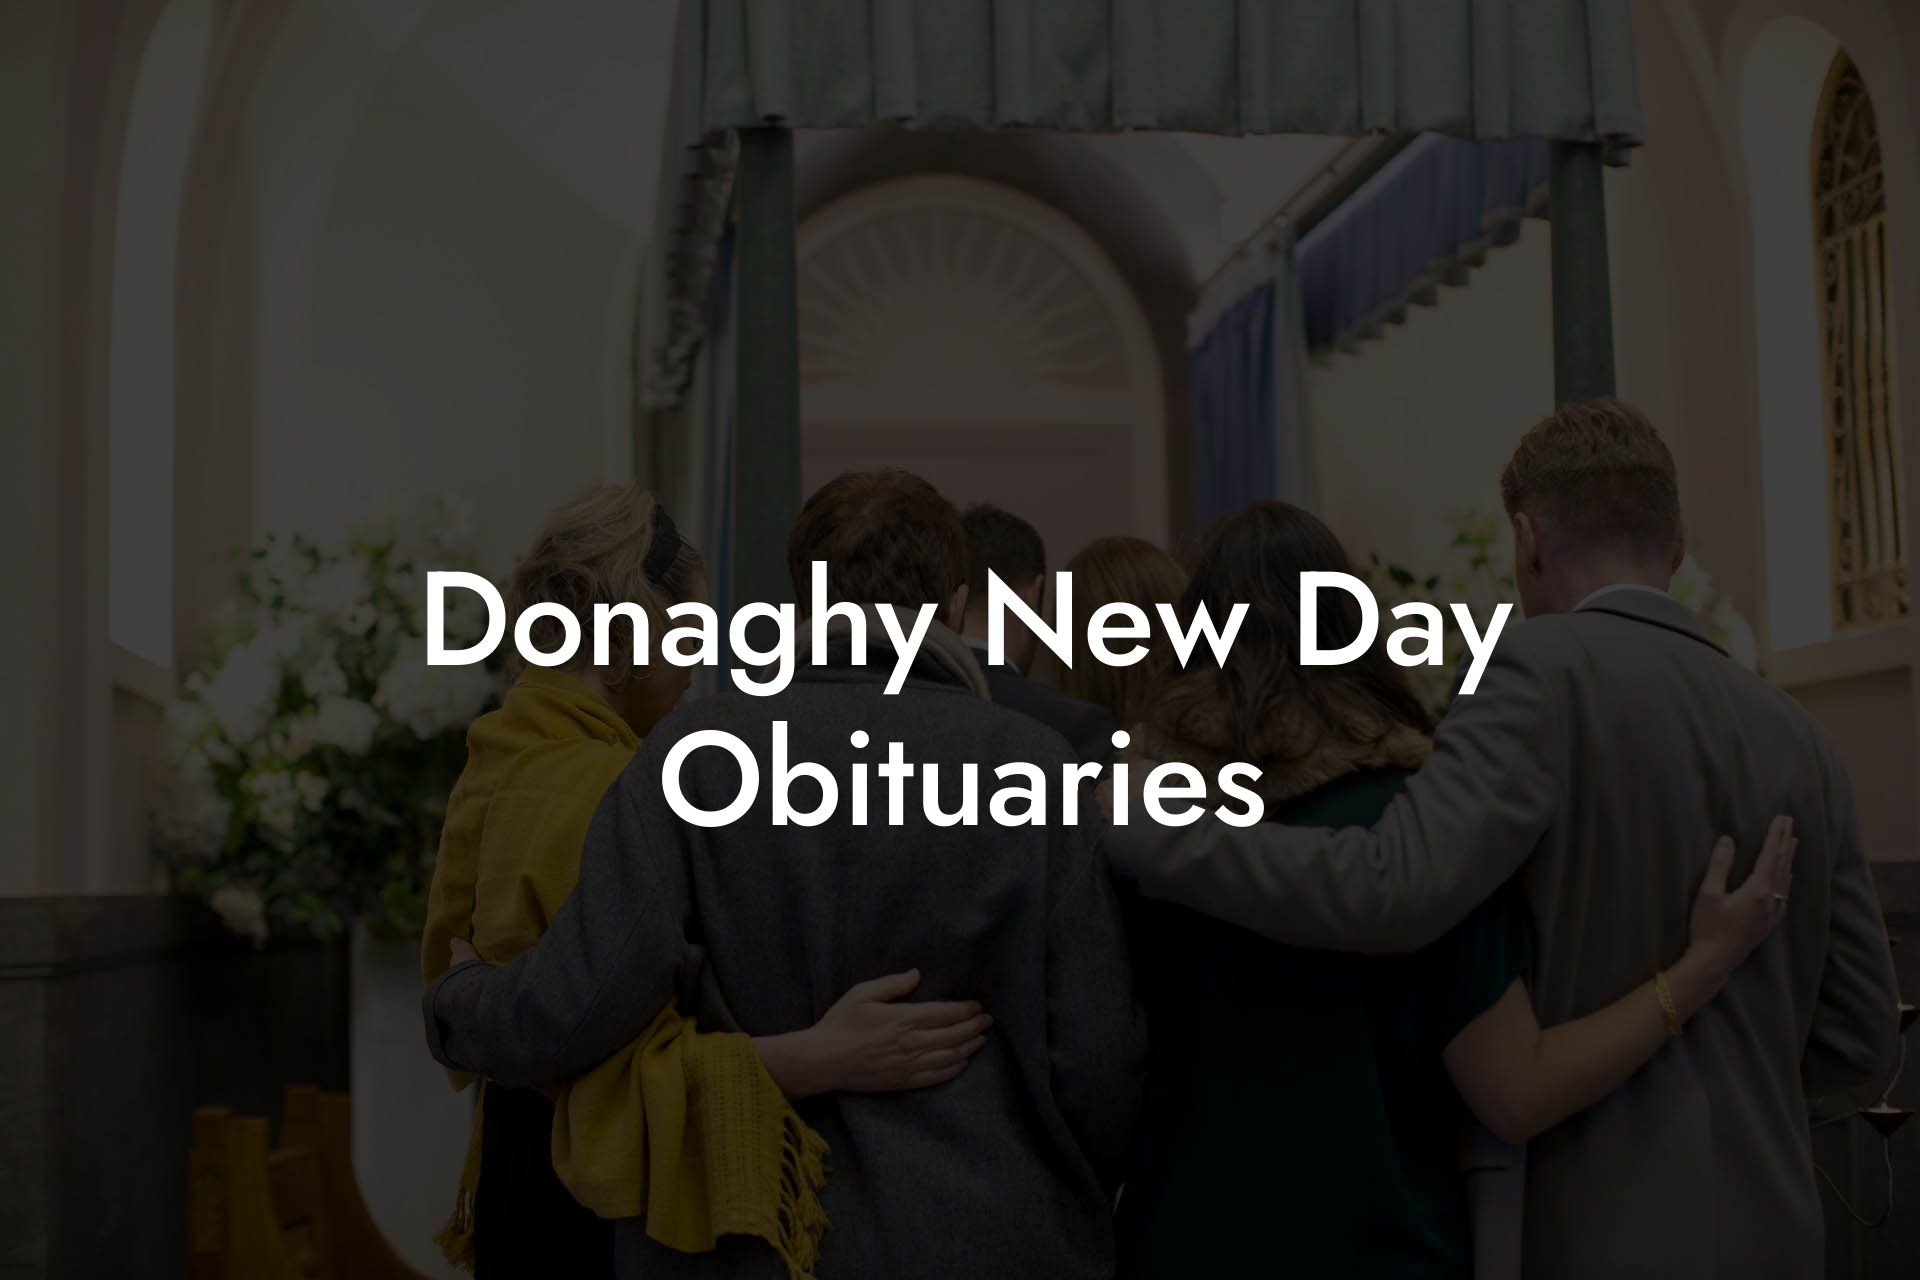 Donaghy New Day Obituaries